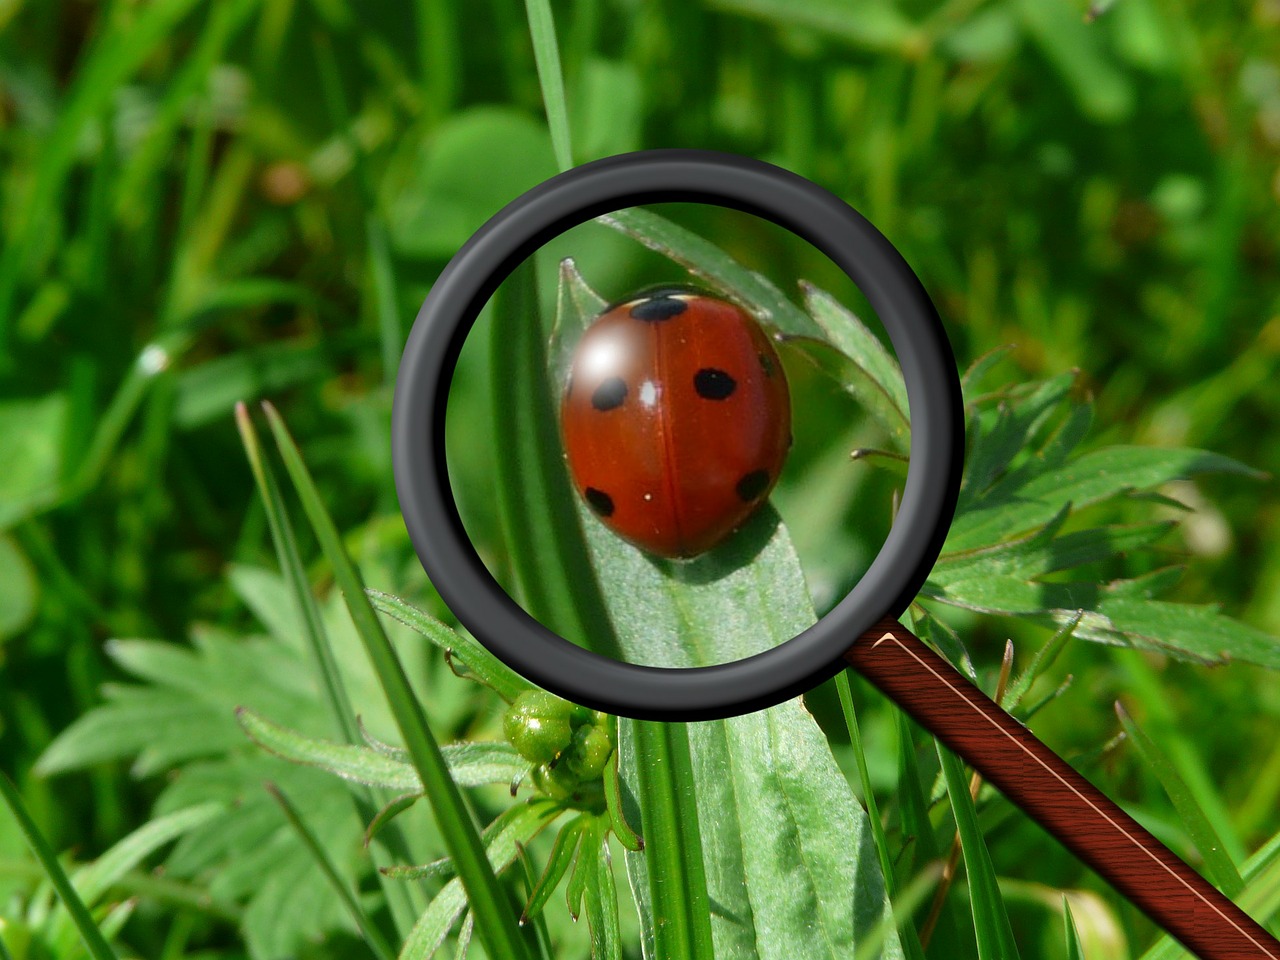 How to Become the Sherlock Holmes of Bug Searching: Concentration on the Details